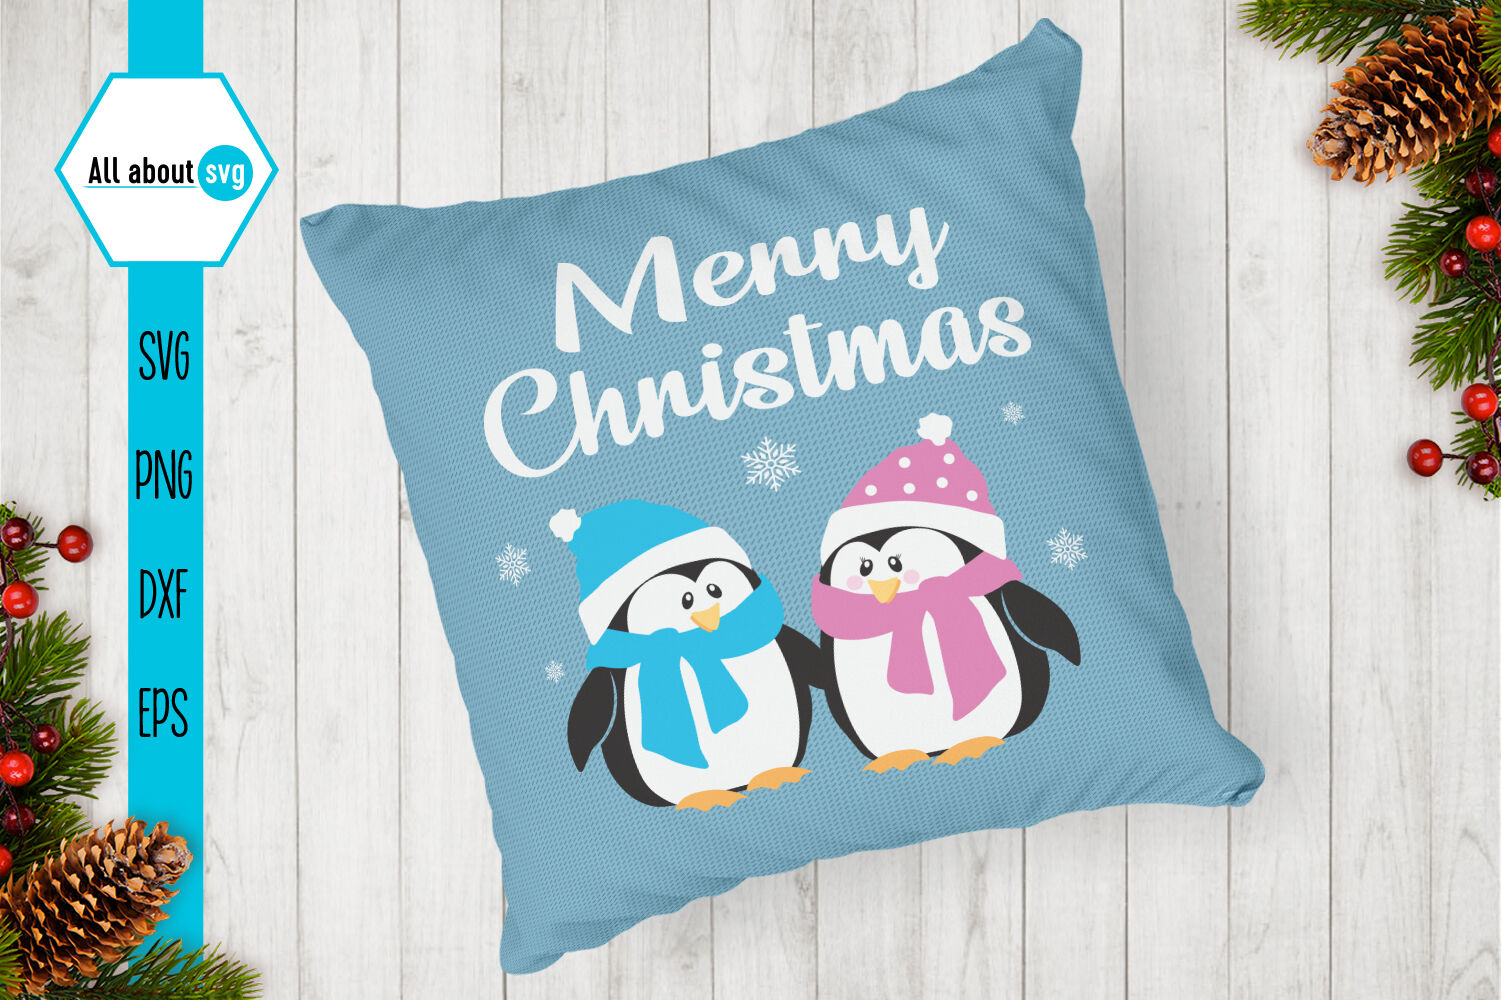 Merry Christmas Penguins Svg By All About Svg Thehungryjpeg Com